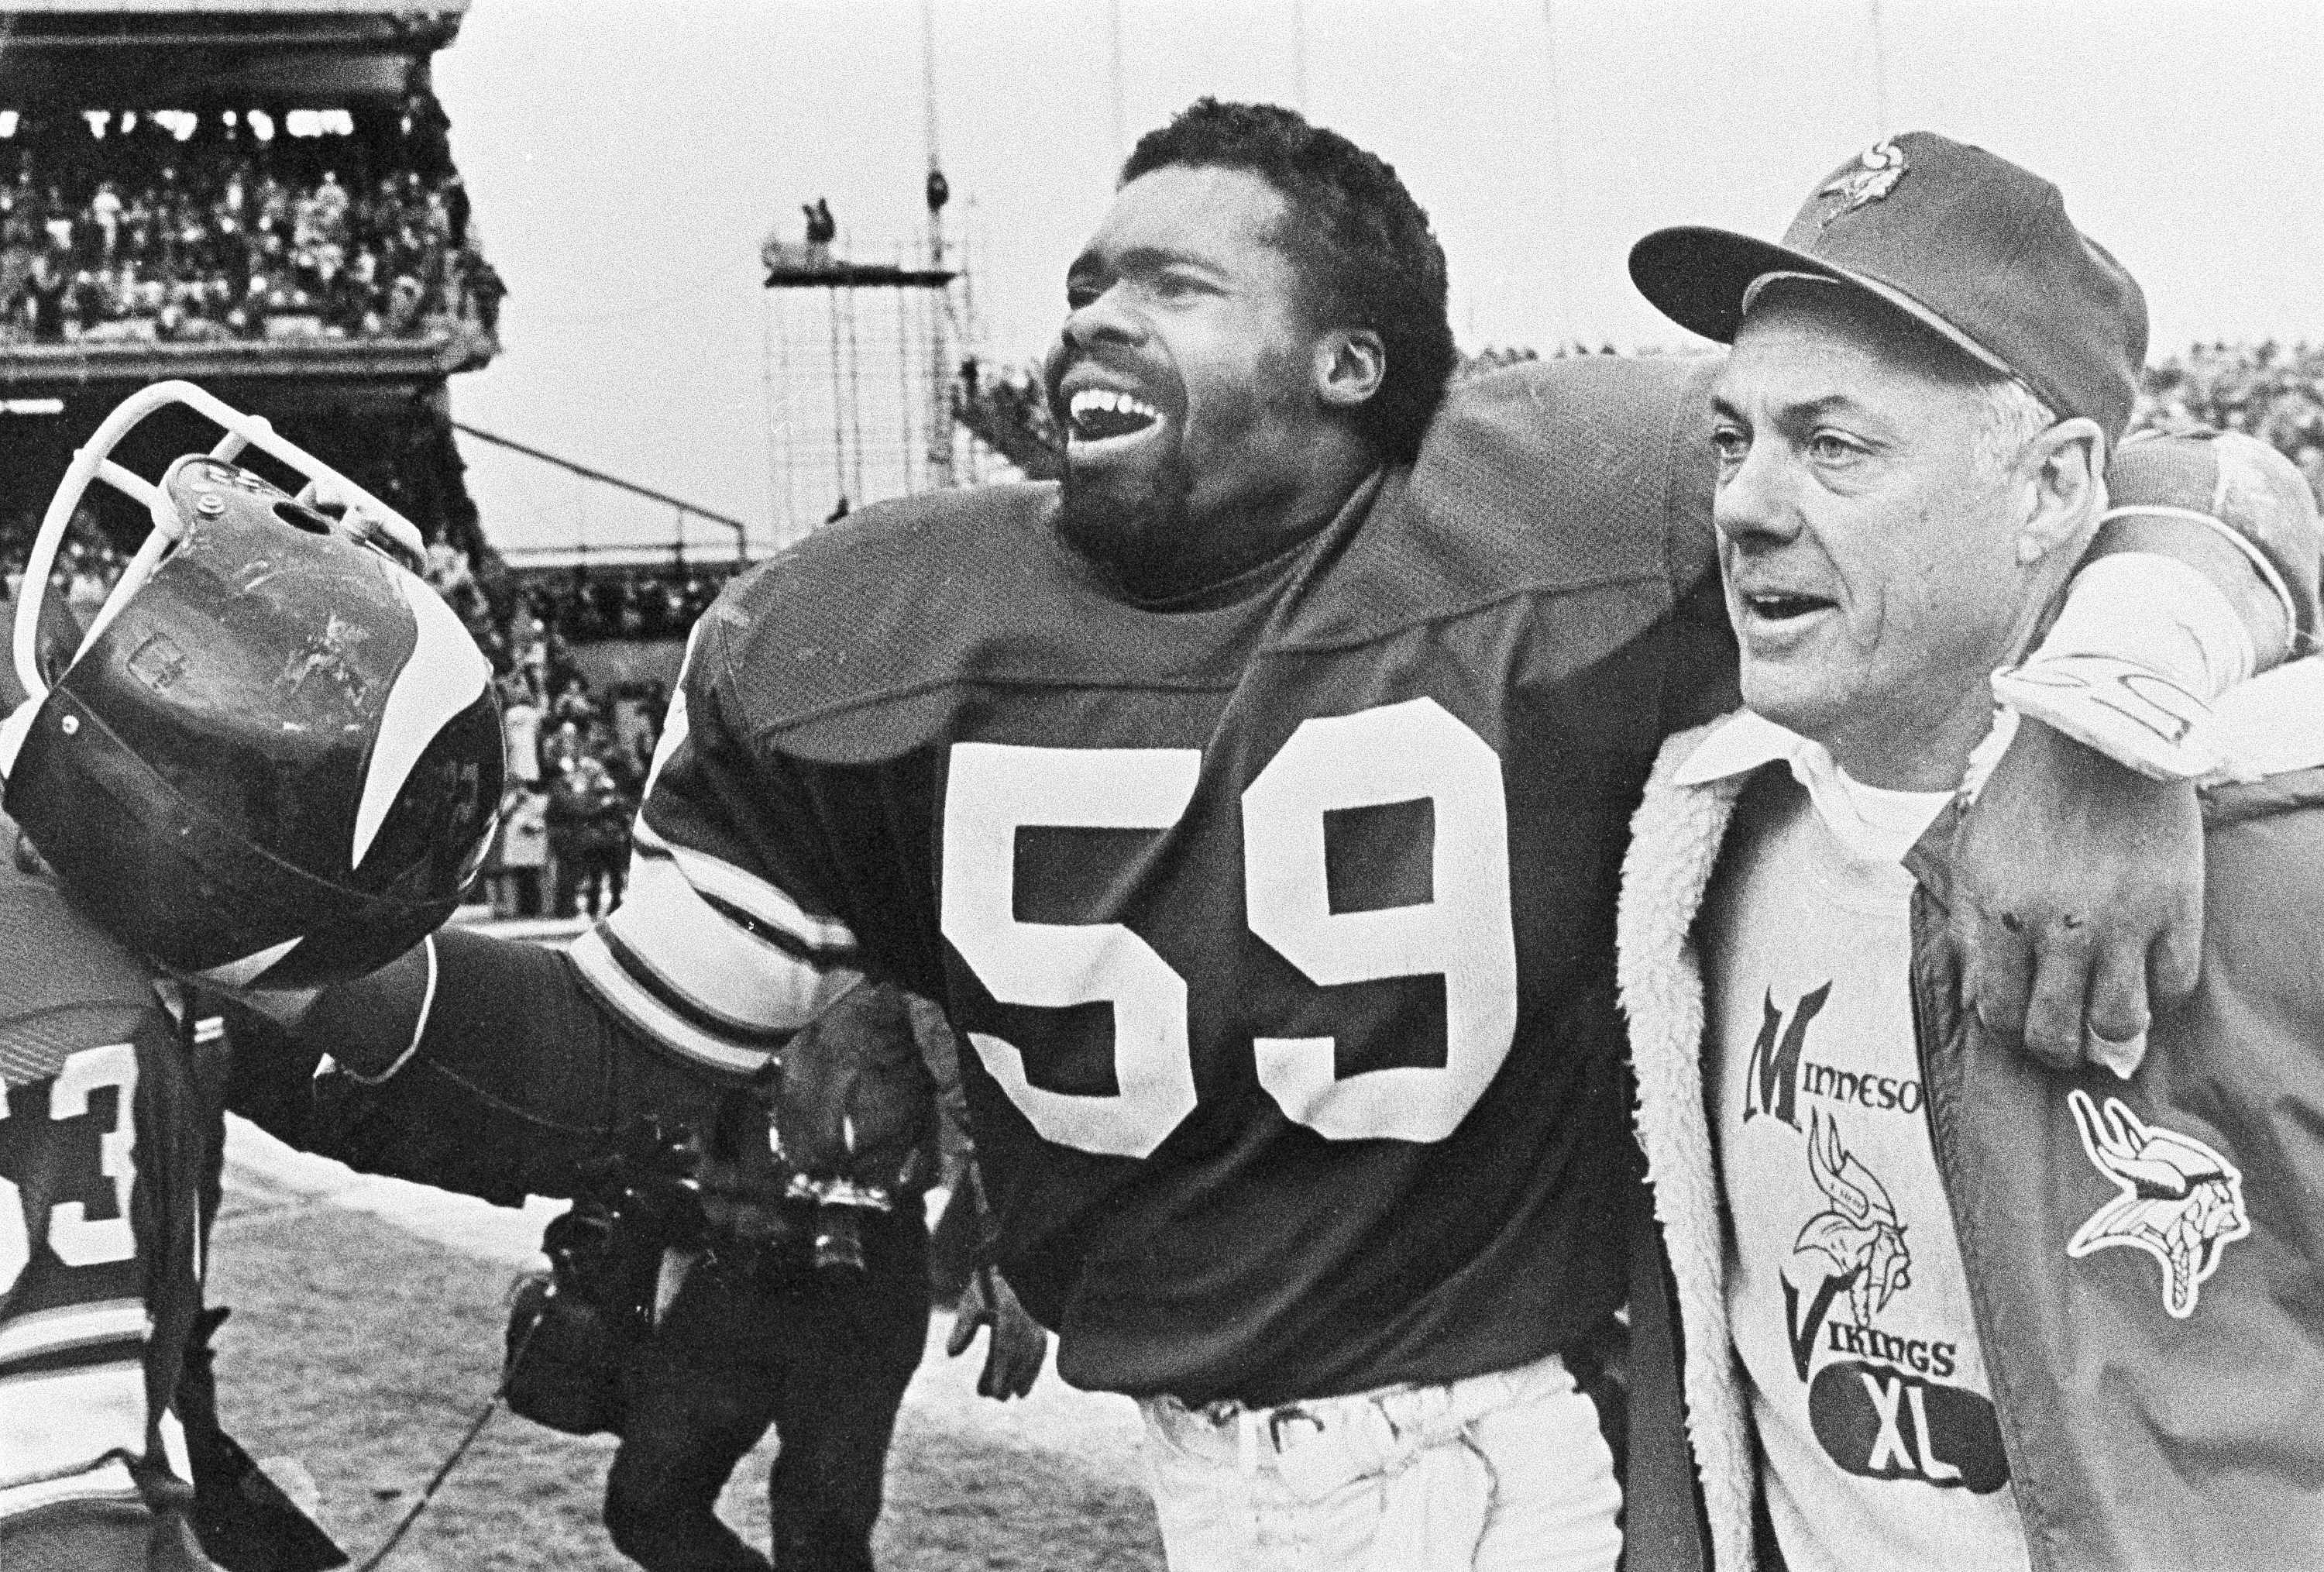 FILE - In this Dec. 14, 1980 photo, Minnesota Vikings coach Bud Grant smiles as he walks into the locker room with his arms around linebacker Matt Blair after beating the Cleveland Browns.  On Saturday, March 11, 2023, Grant passes away at the age of 95.  (AP Photo/File)